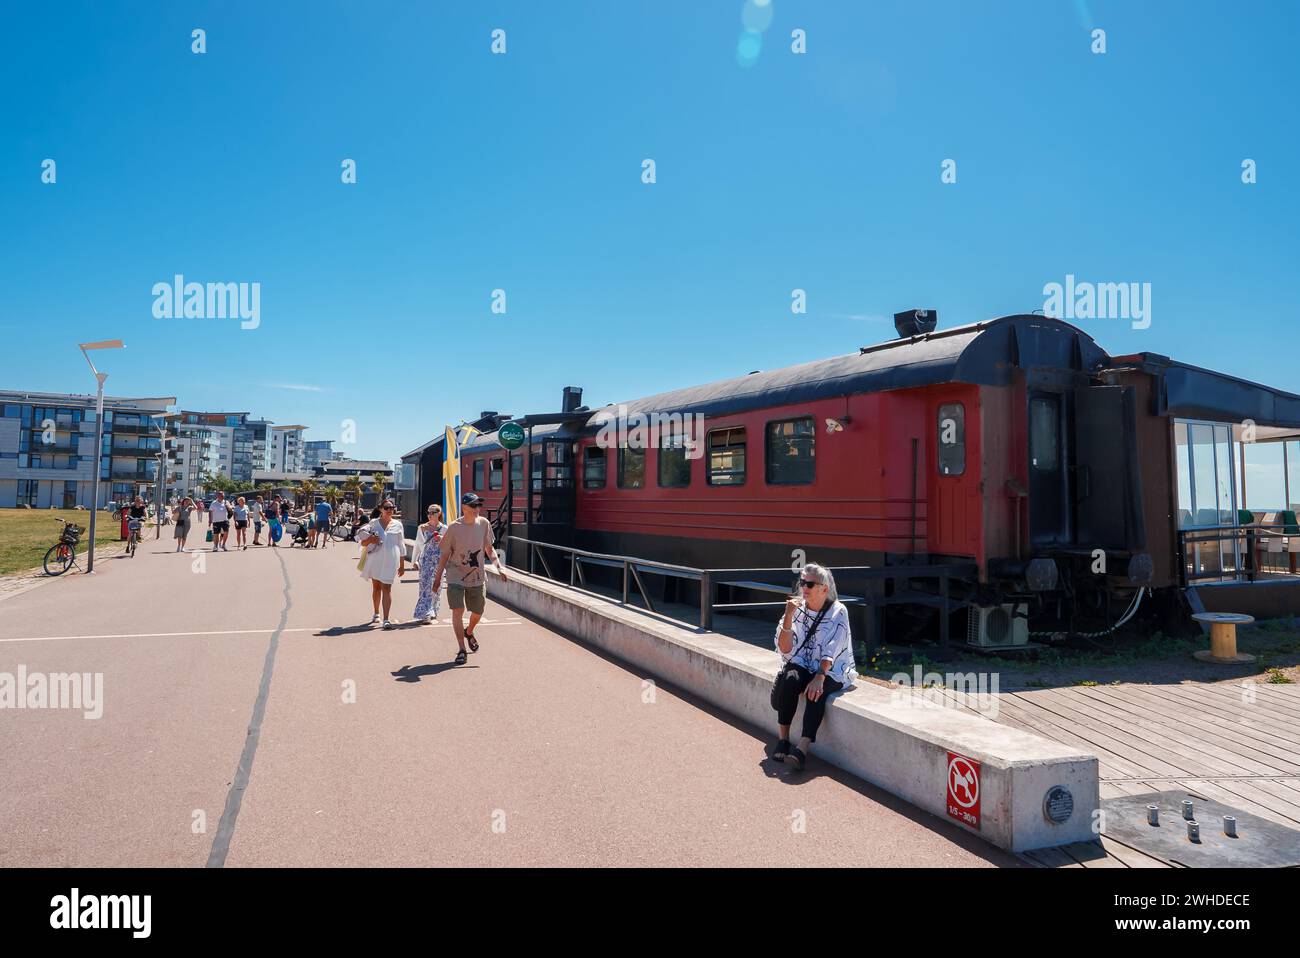 Vintage Red Train Carriage Basking in Sunshine, Helsingborg, Sweden Day Stock Photo